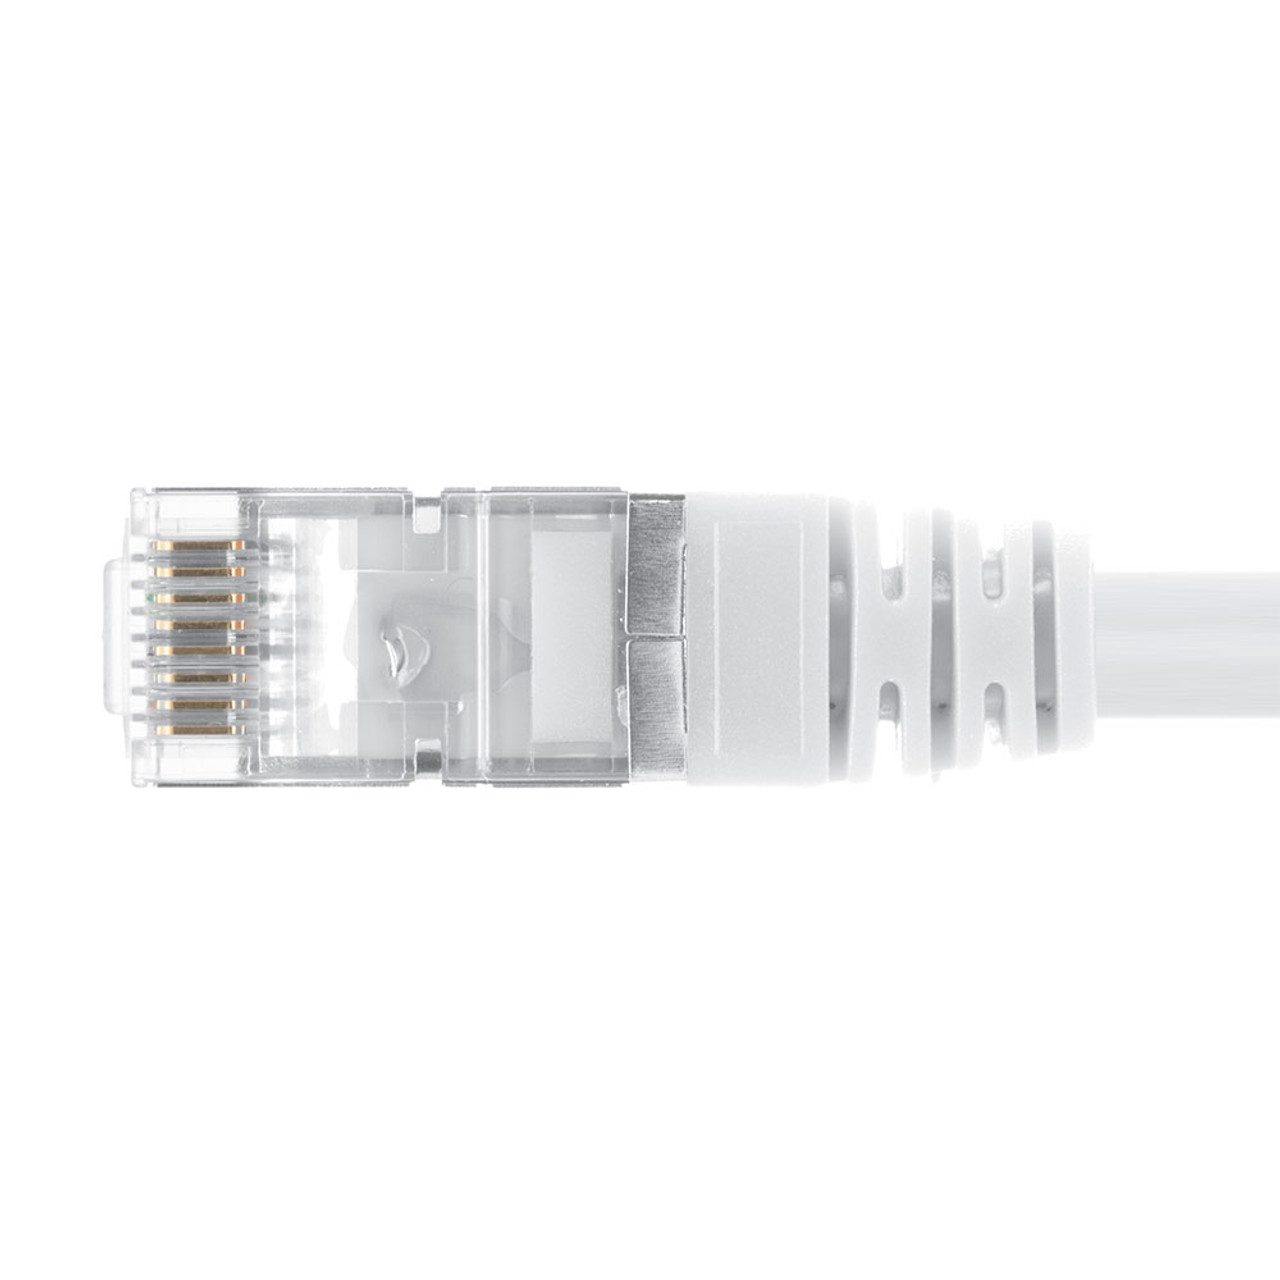 Ethernet Patch Cable CAT6, F/UTP, 26AWG, 10 Ft,  5 pack, White